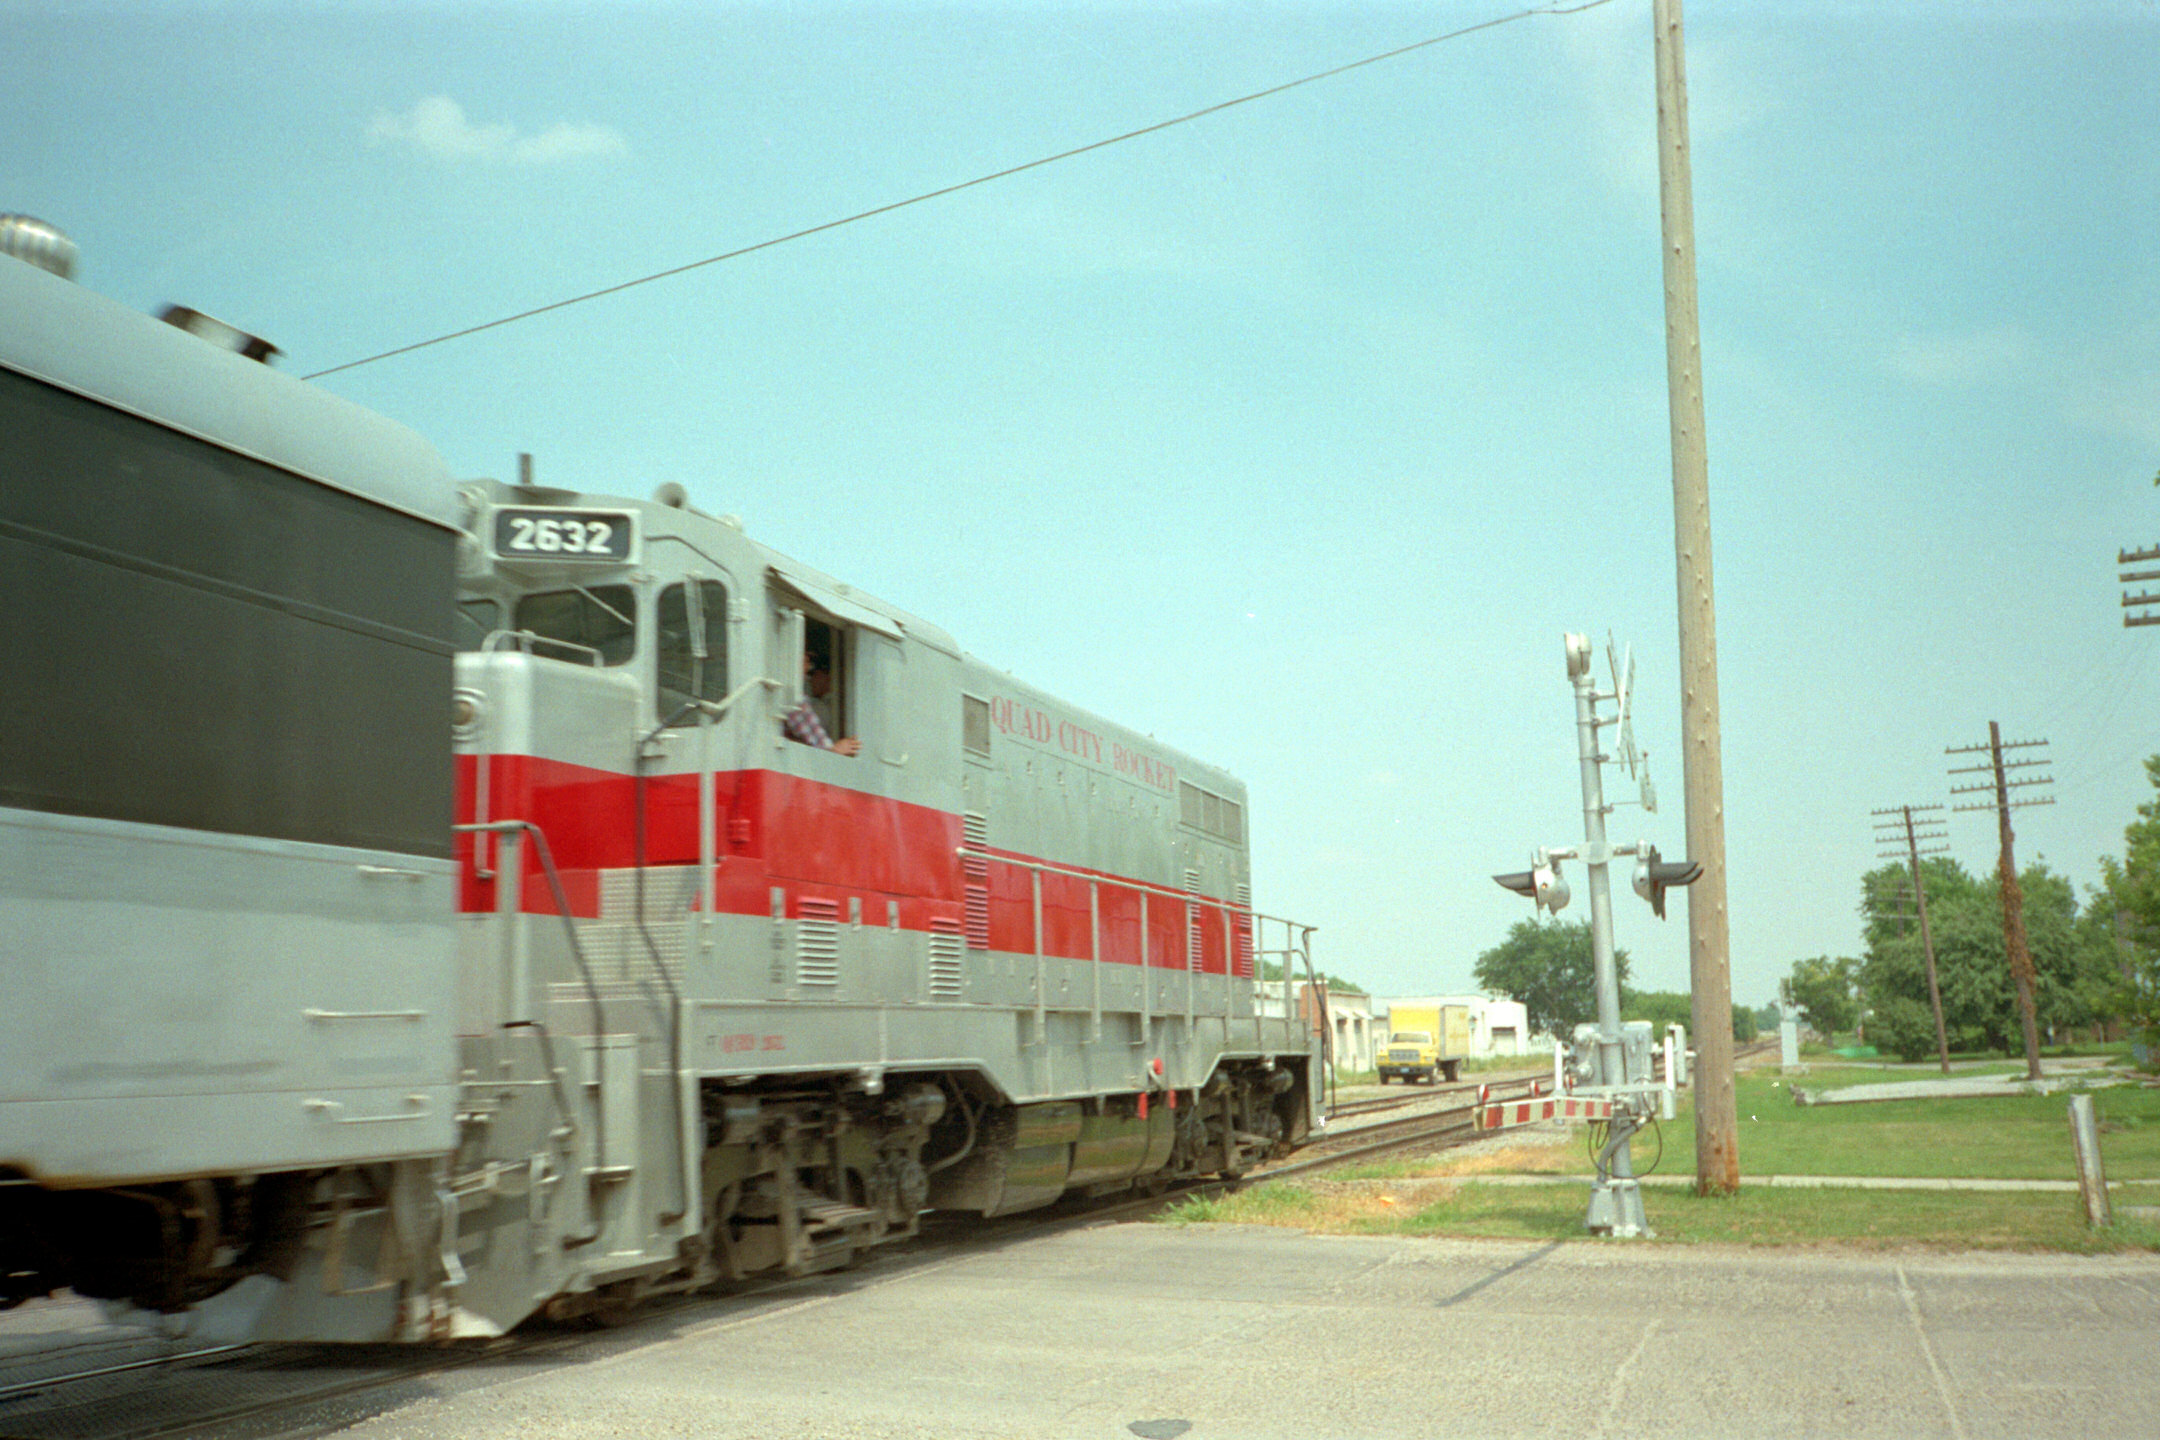 Late in the Quad City Rocket's existance, the 2632 acquired a red stripe down the middle